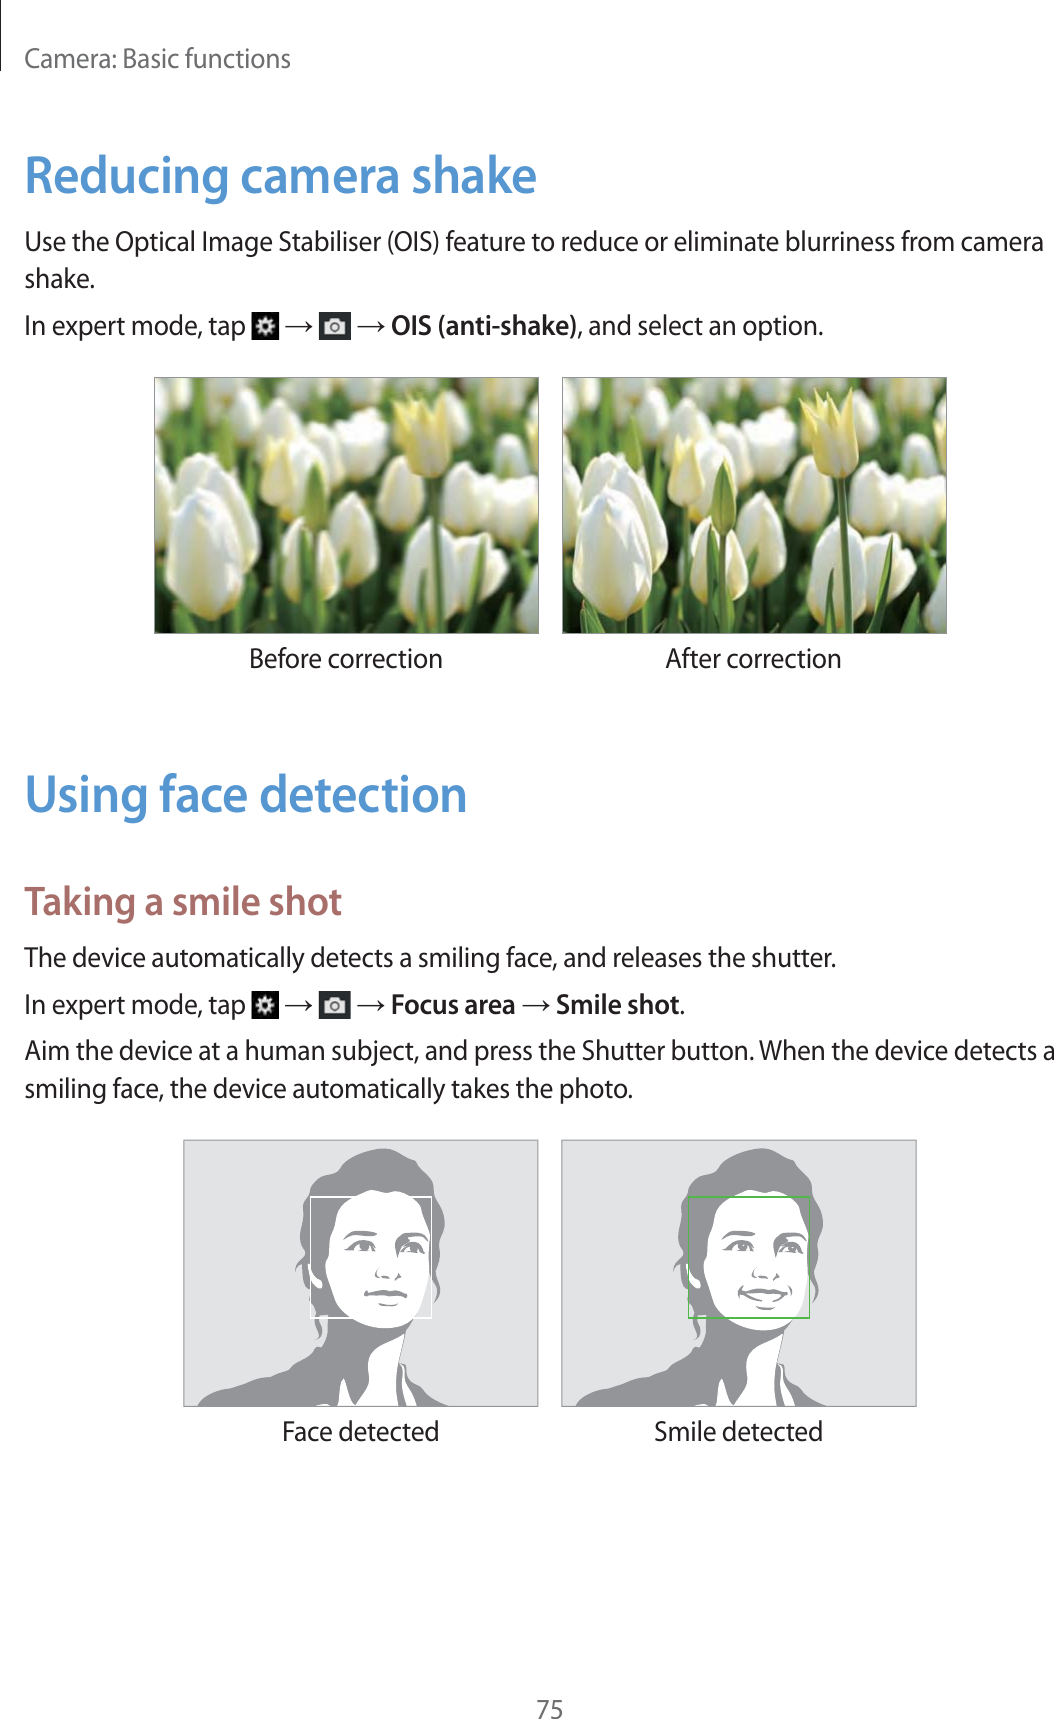 Camera: Basic functions75Reducing camera shakeUse the Optical Image Stabiliser (OIS) feature to reduce or eliminate blurriness from camera shake.In expert mode, tap       OIS (anti-shake), and select an option.Before correction After correctionUsing face detectionTaking a smile shotThe device automatically detects a smiling face, and releases the shutter.In expert mode, tap       Focus area  Smile shot.Aim the device at a human subject, and press the Shutter button. When the device detects a smiling face, the device automatically takes the photo.Face detected Smile detected